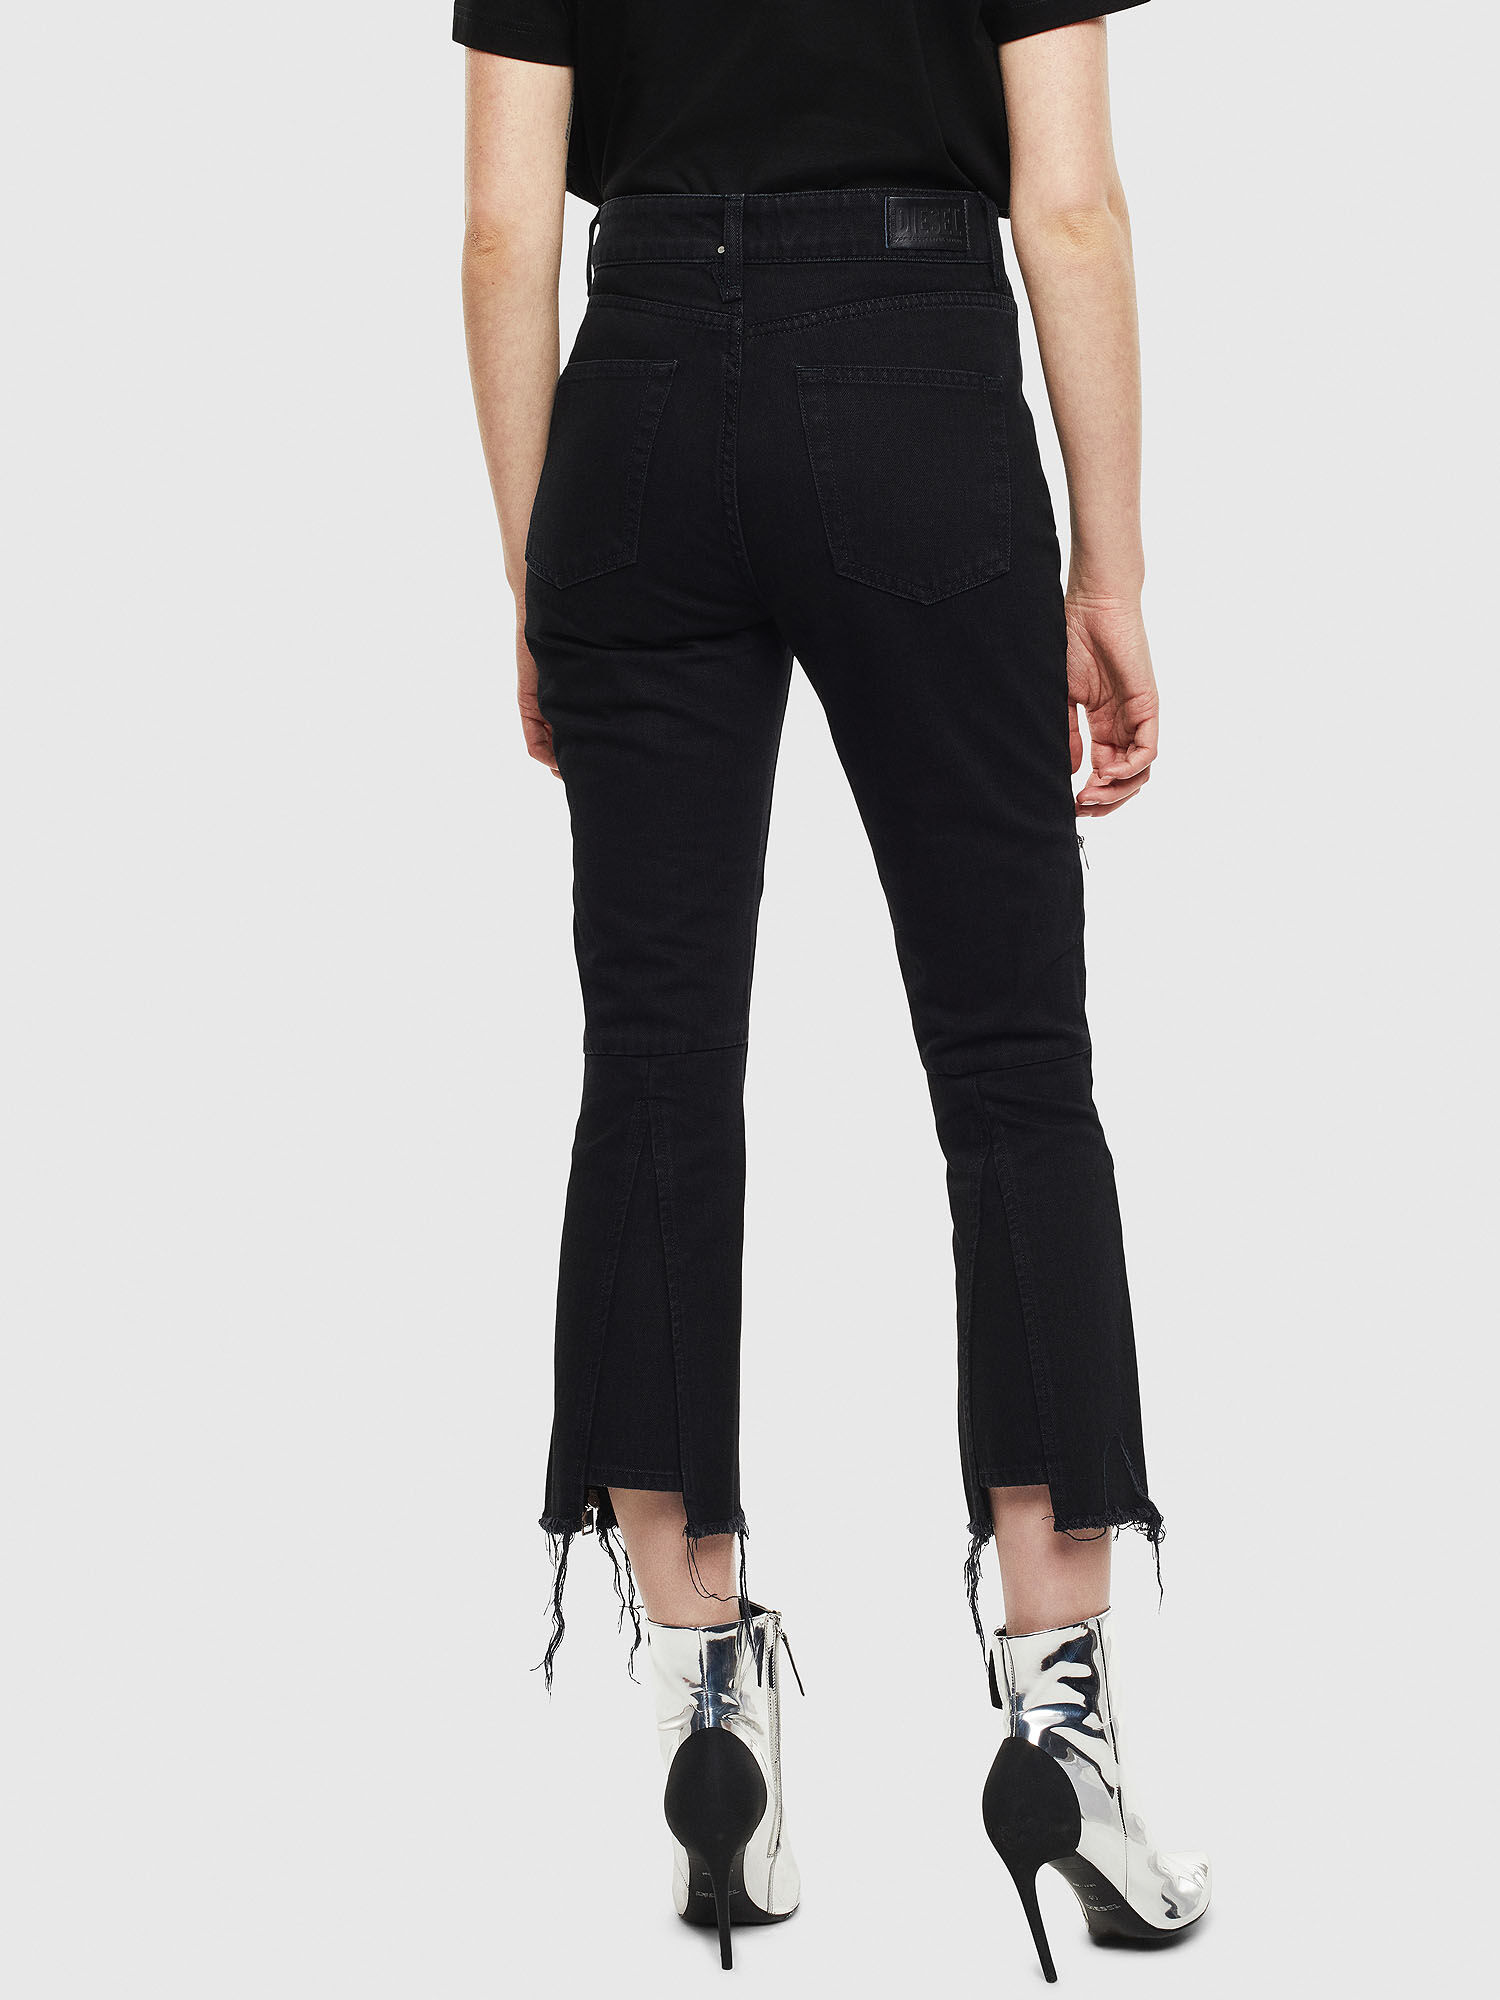 Buy MAATE Women Black Slim fit Jegging Online at Low Prices in India 